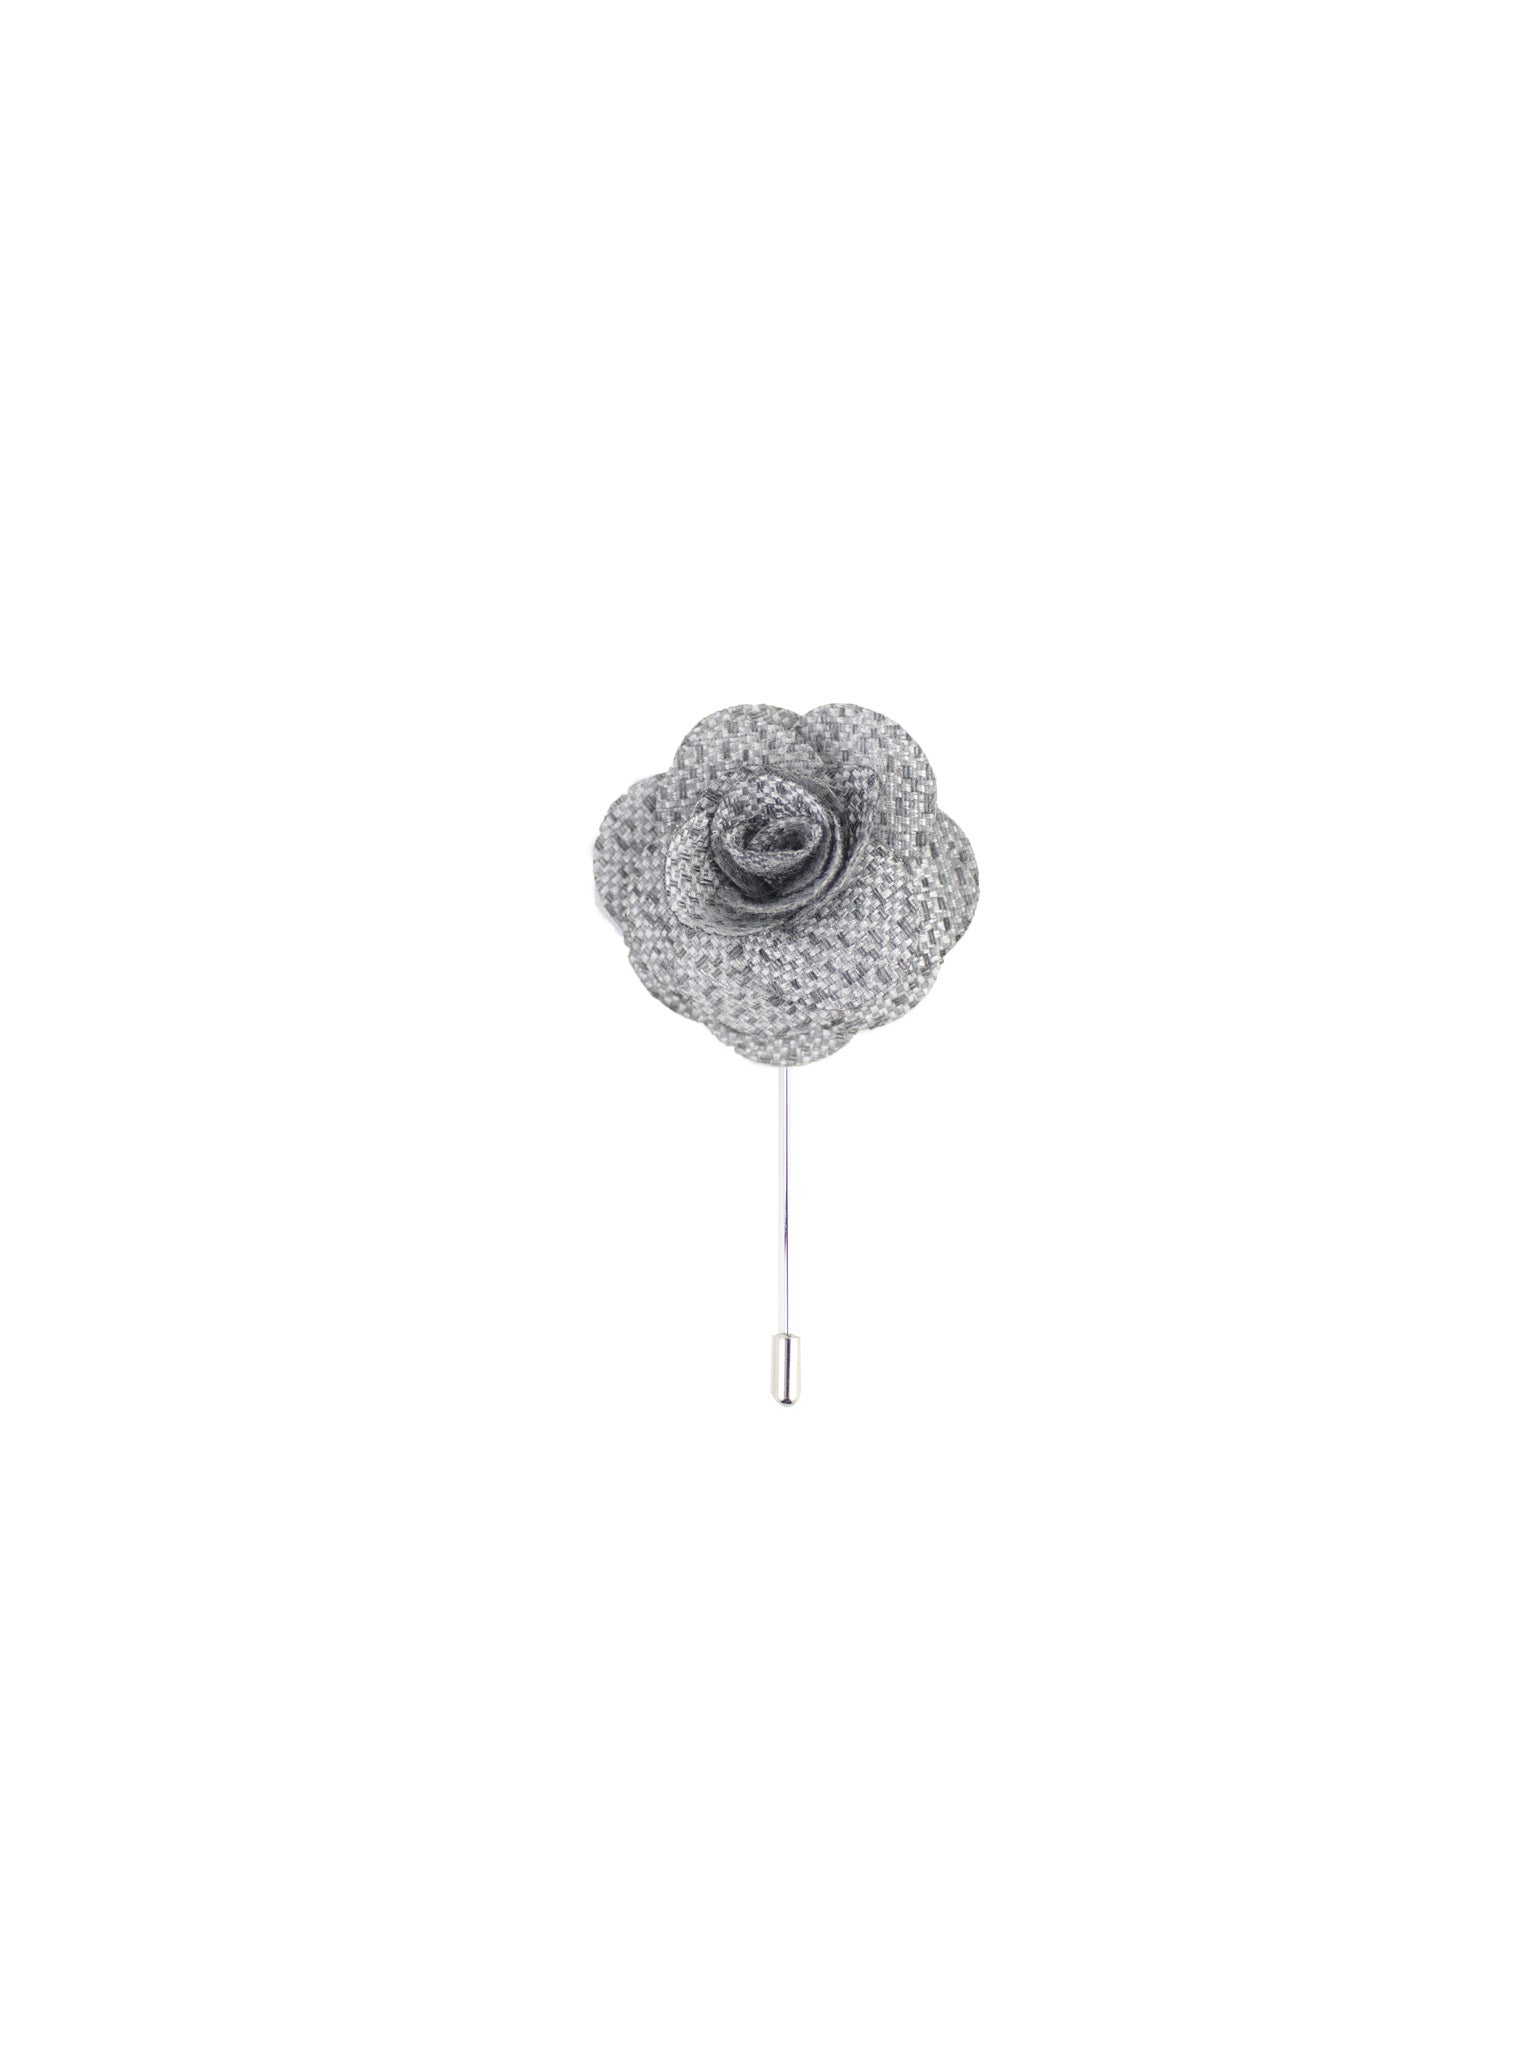 Silver & Charcoal Heather Lapel Pin from DIBI